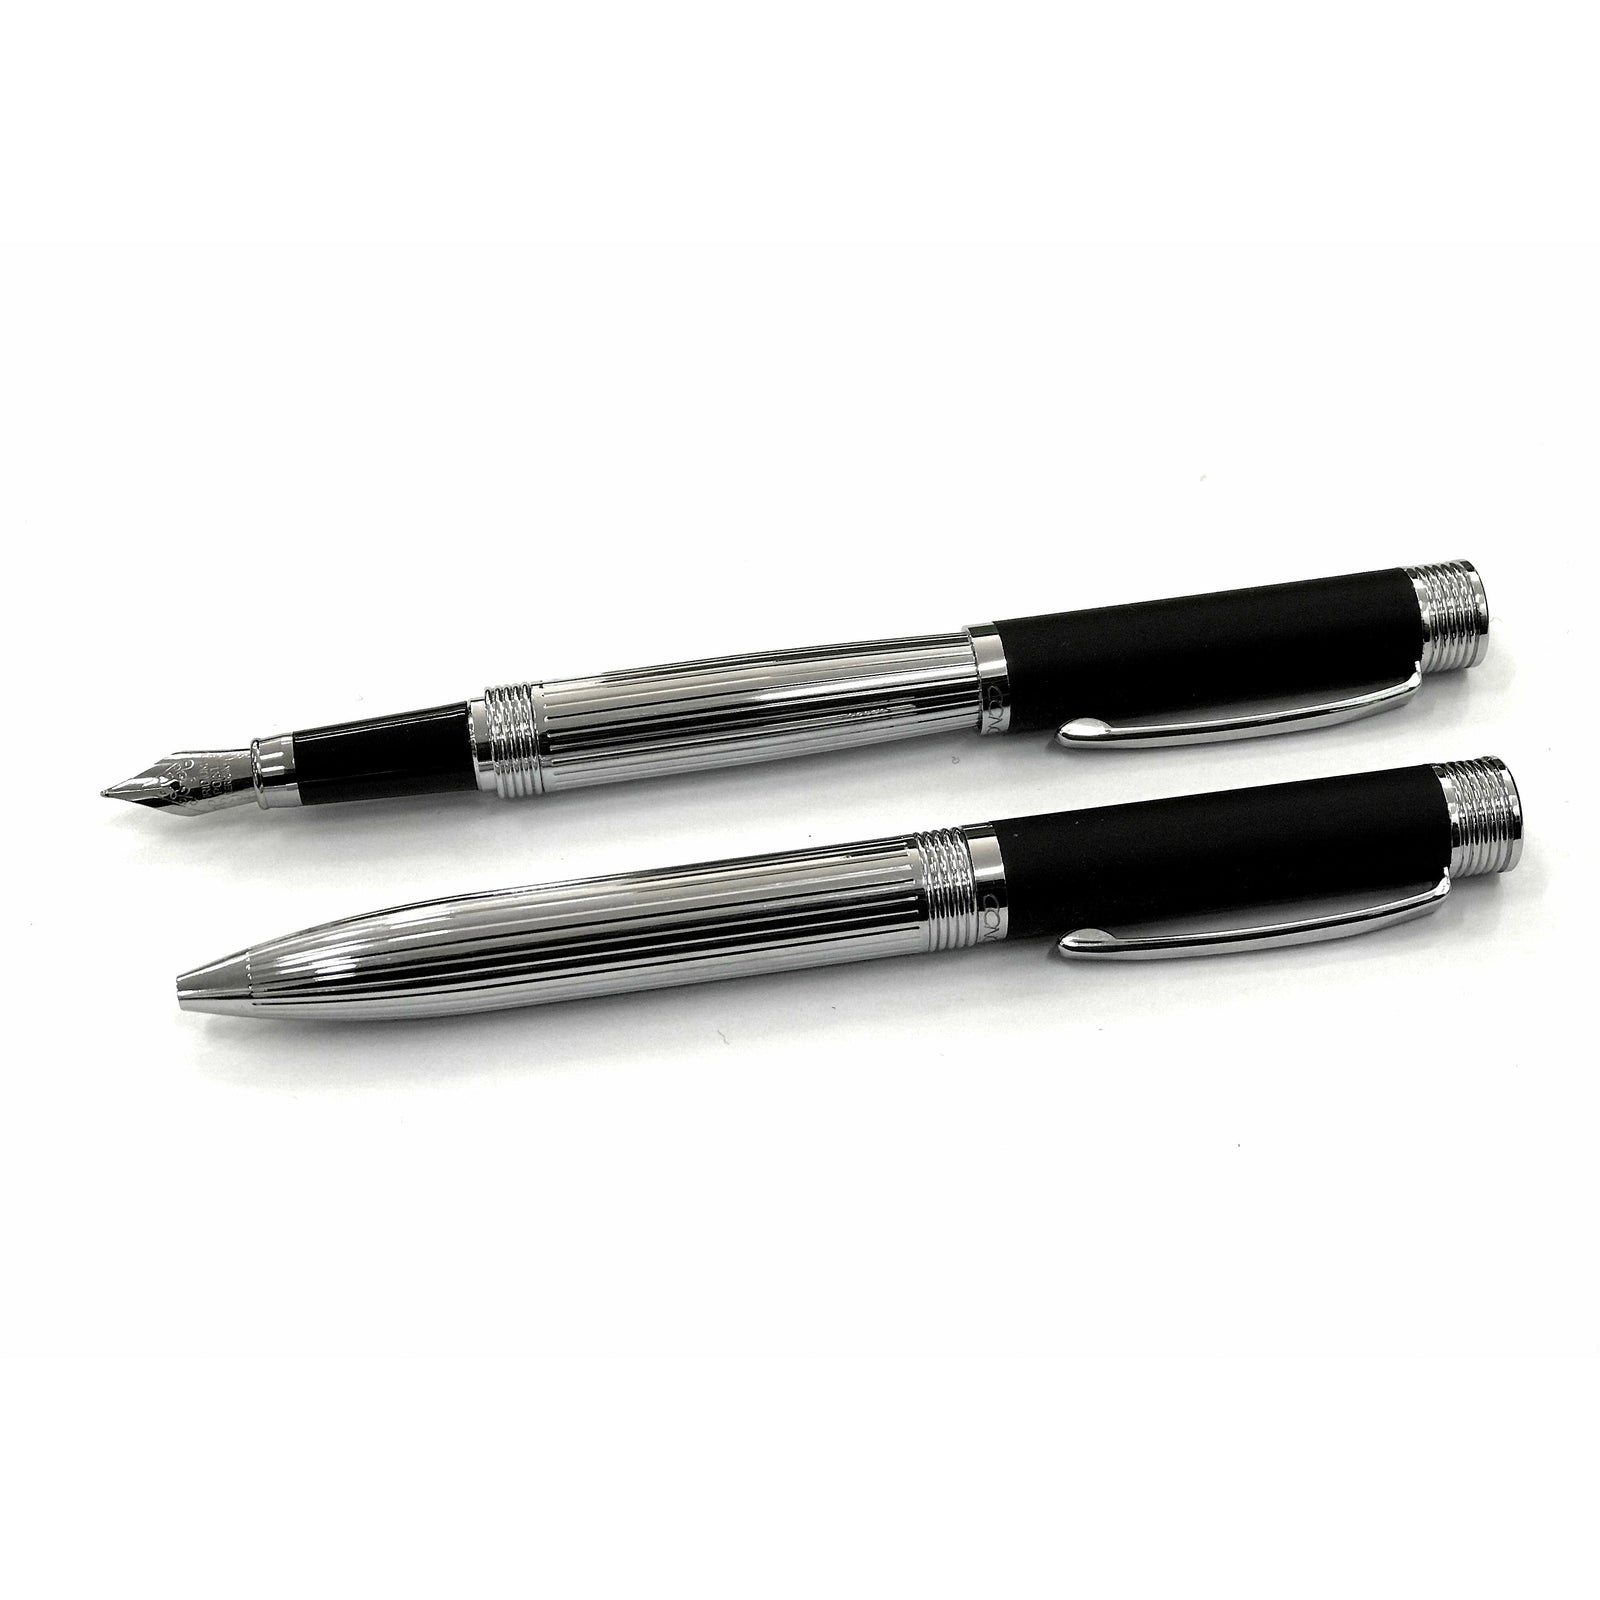 Concord Stainless Steel Black CT Fountain & Ballpoint Pen Set